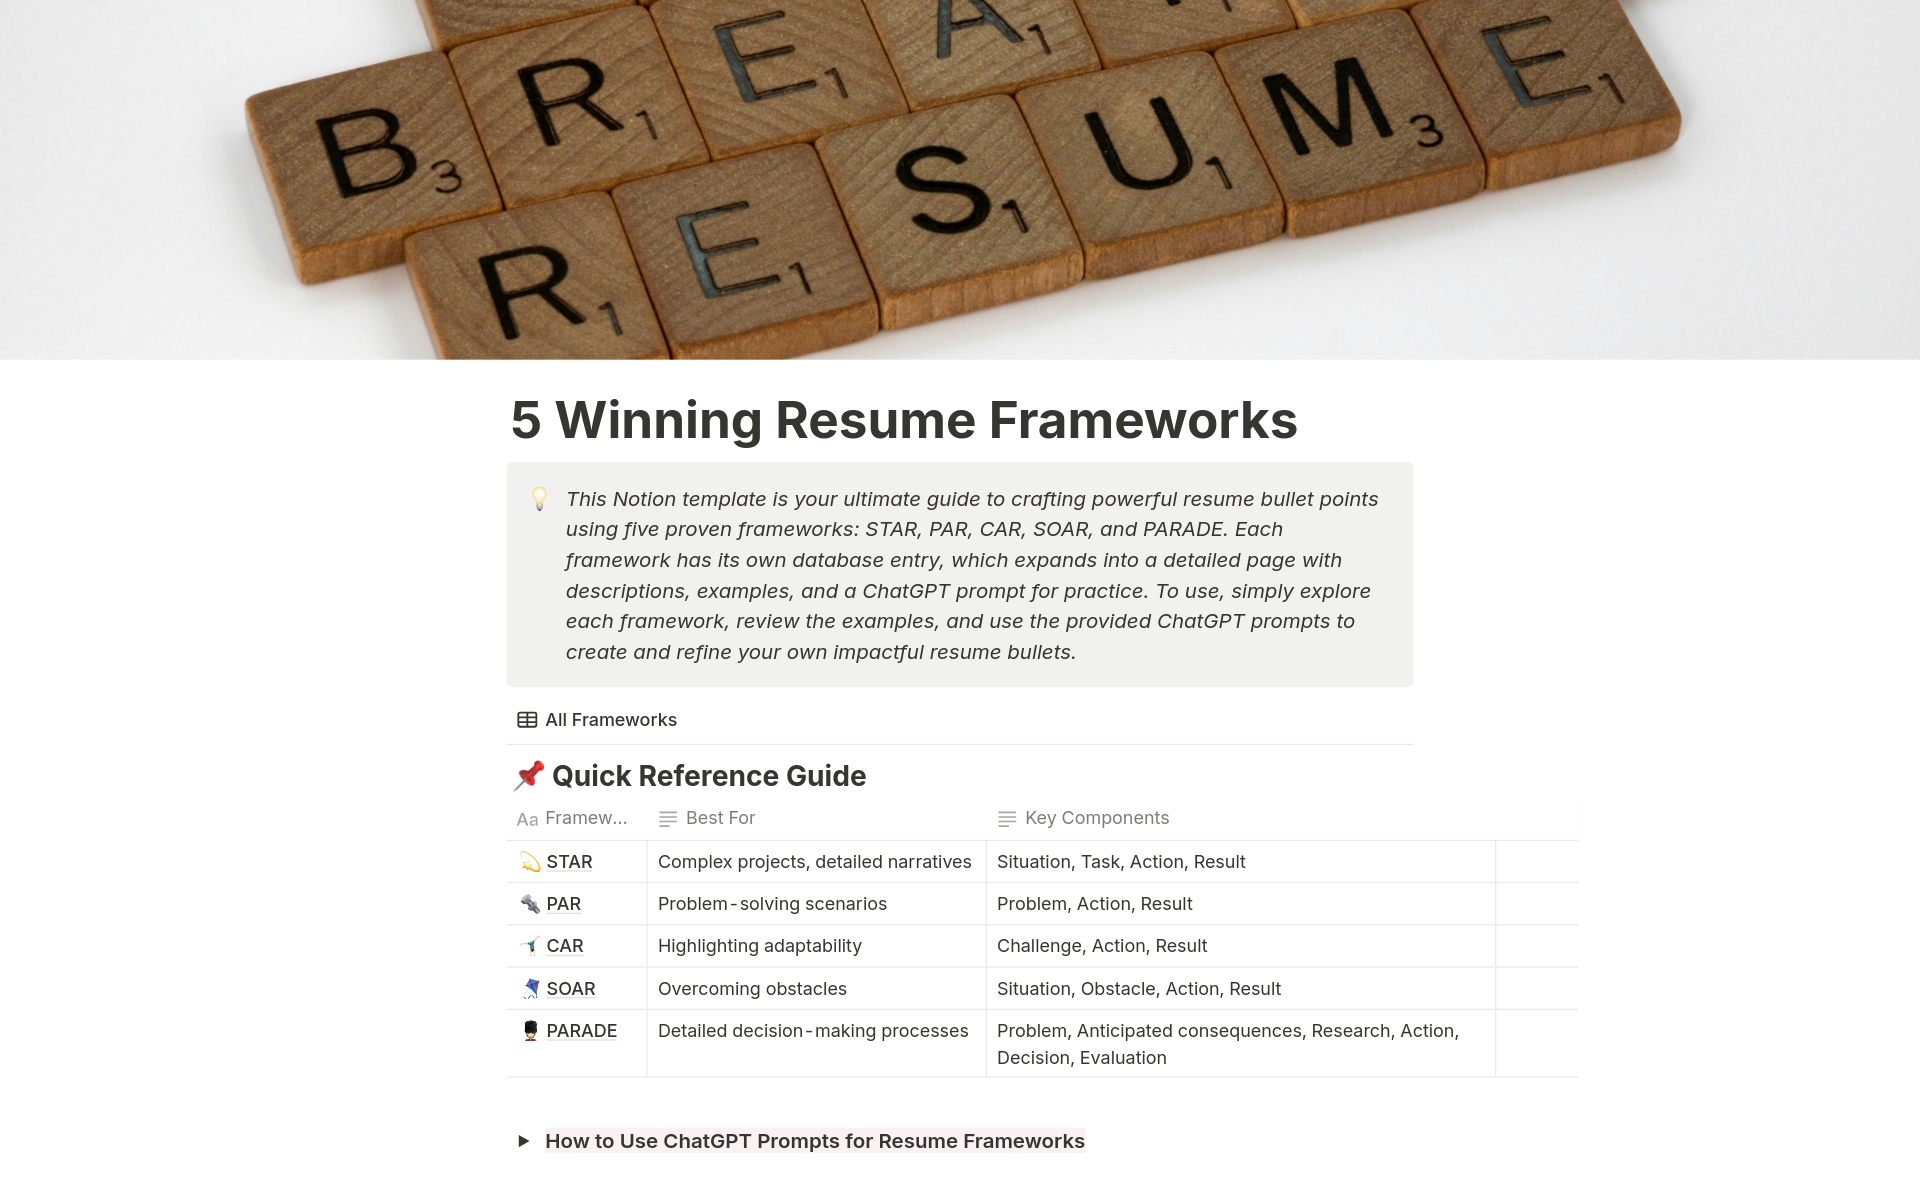 Master 5 powerful resume frameworks to craft compelling job applications. Perfect for job seekers and career coaches alike. Includes STAR, PAR, CAR, SOAR, and PARADE methods with examples, tips, and AI-powered prompts for each framework.
